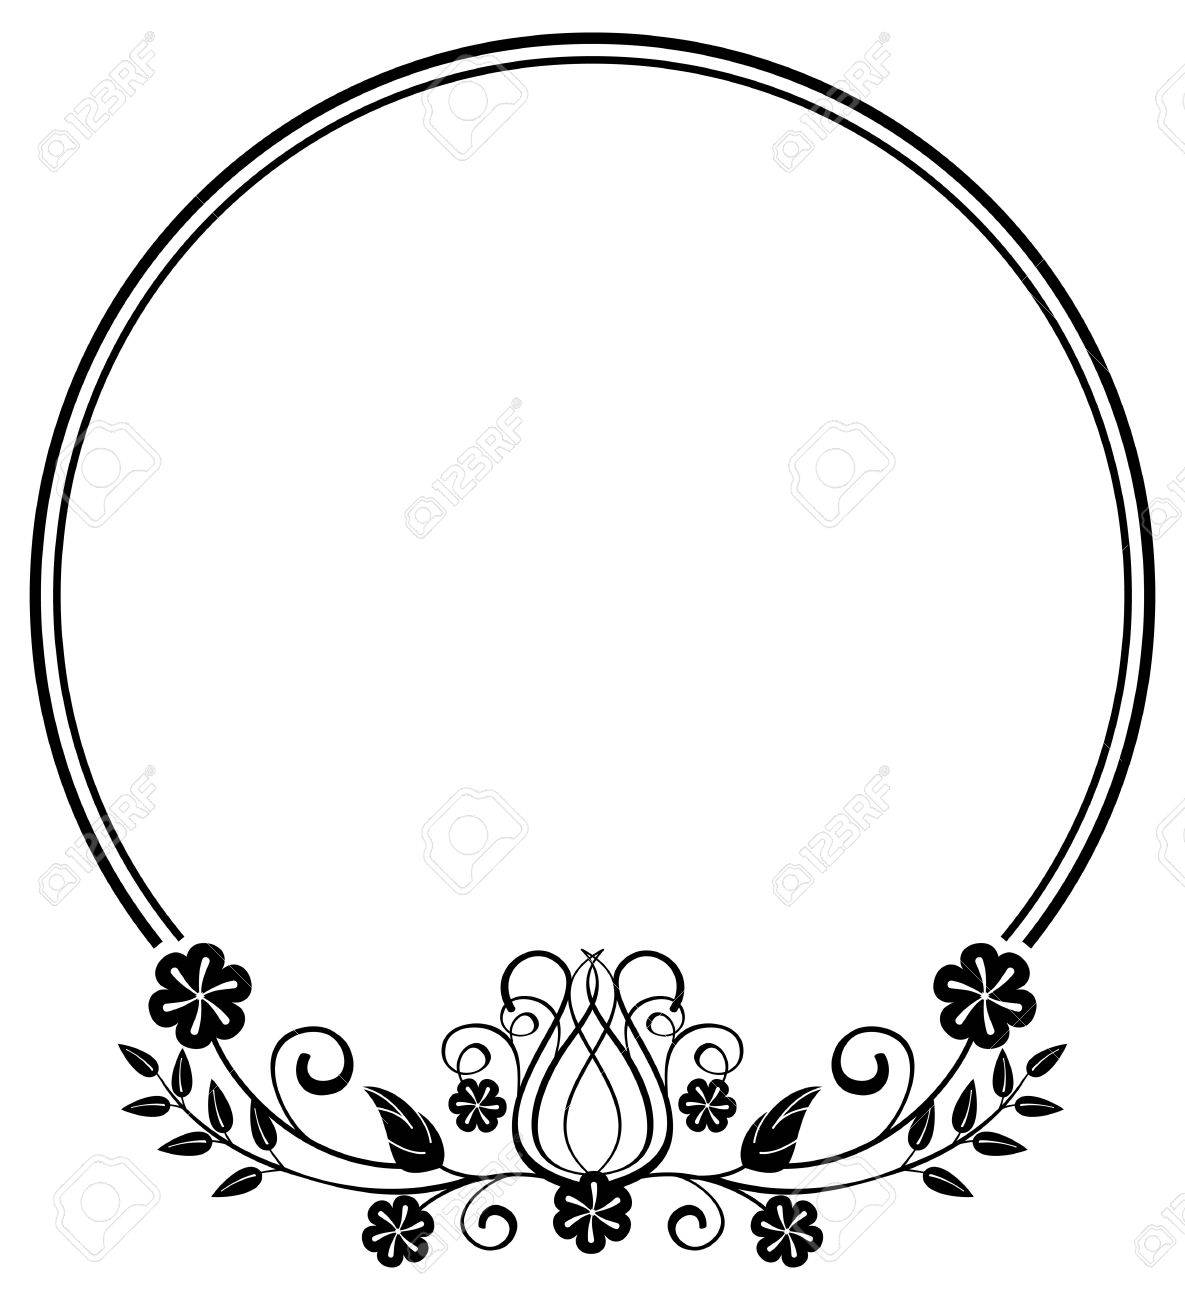 Black and white round frame with floral silhouettes. Copy space.